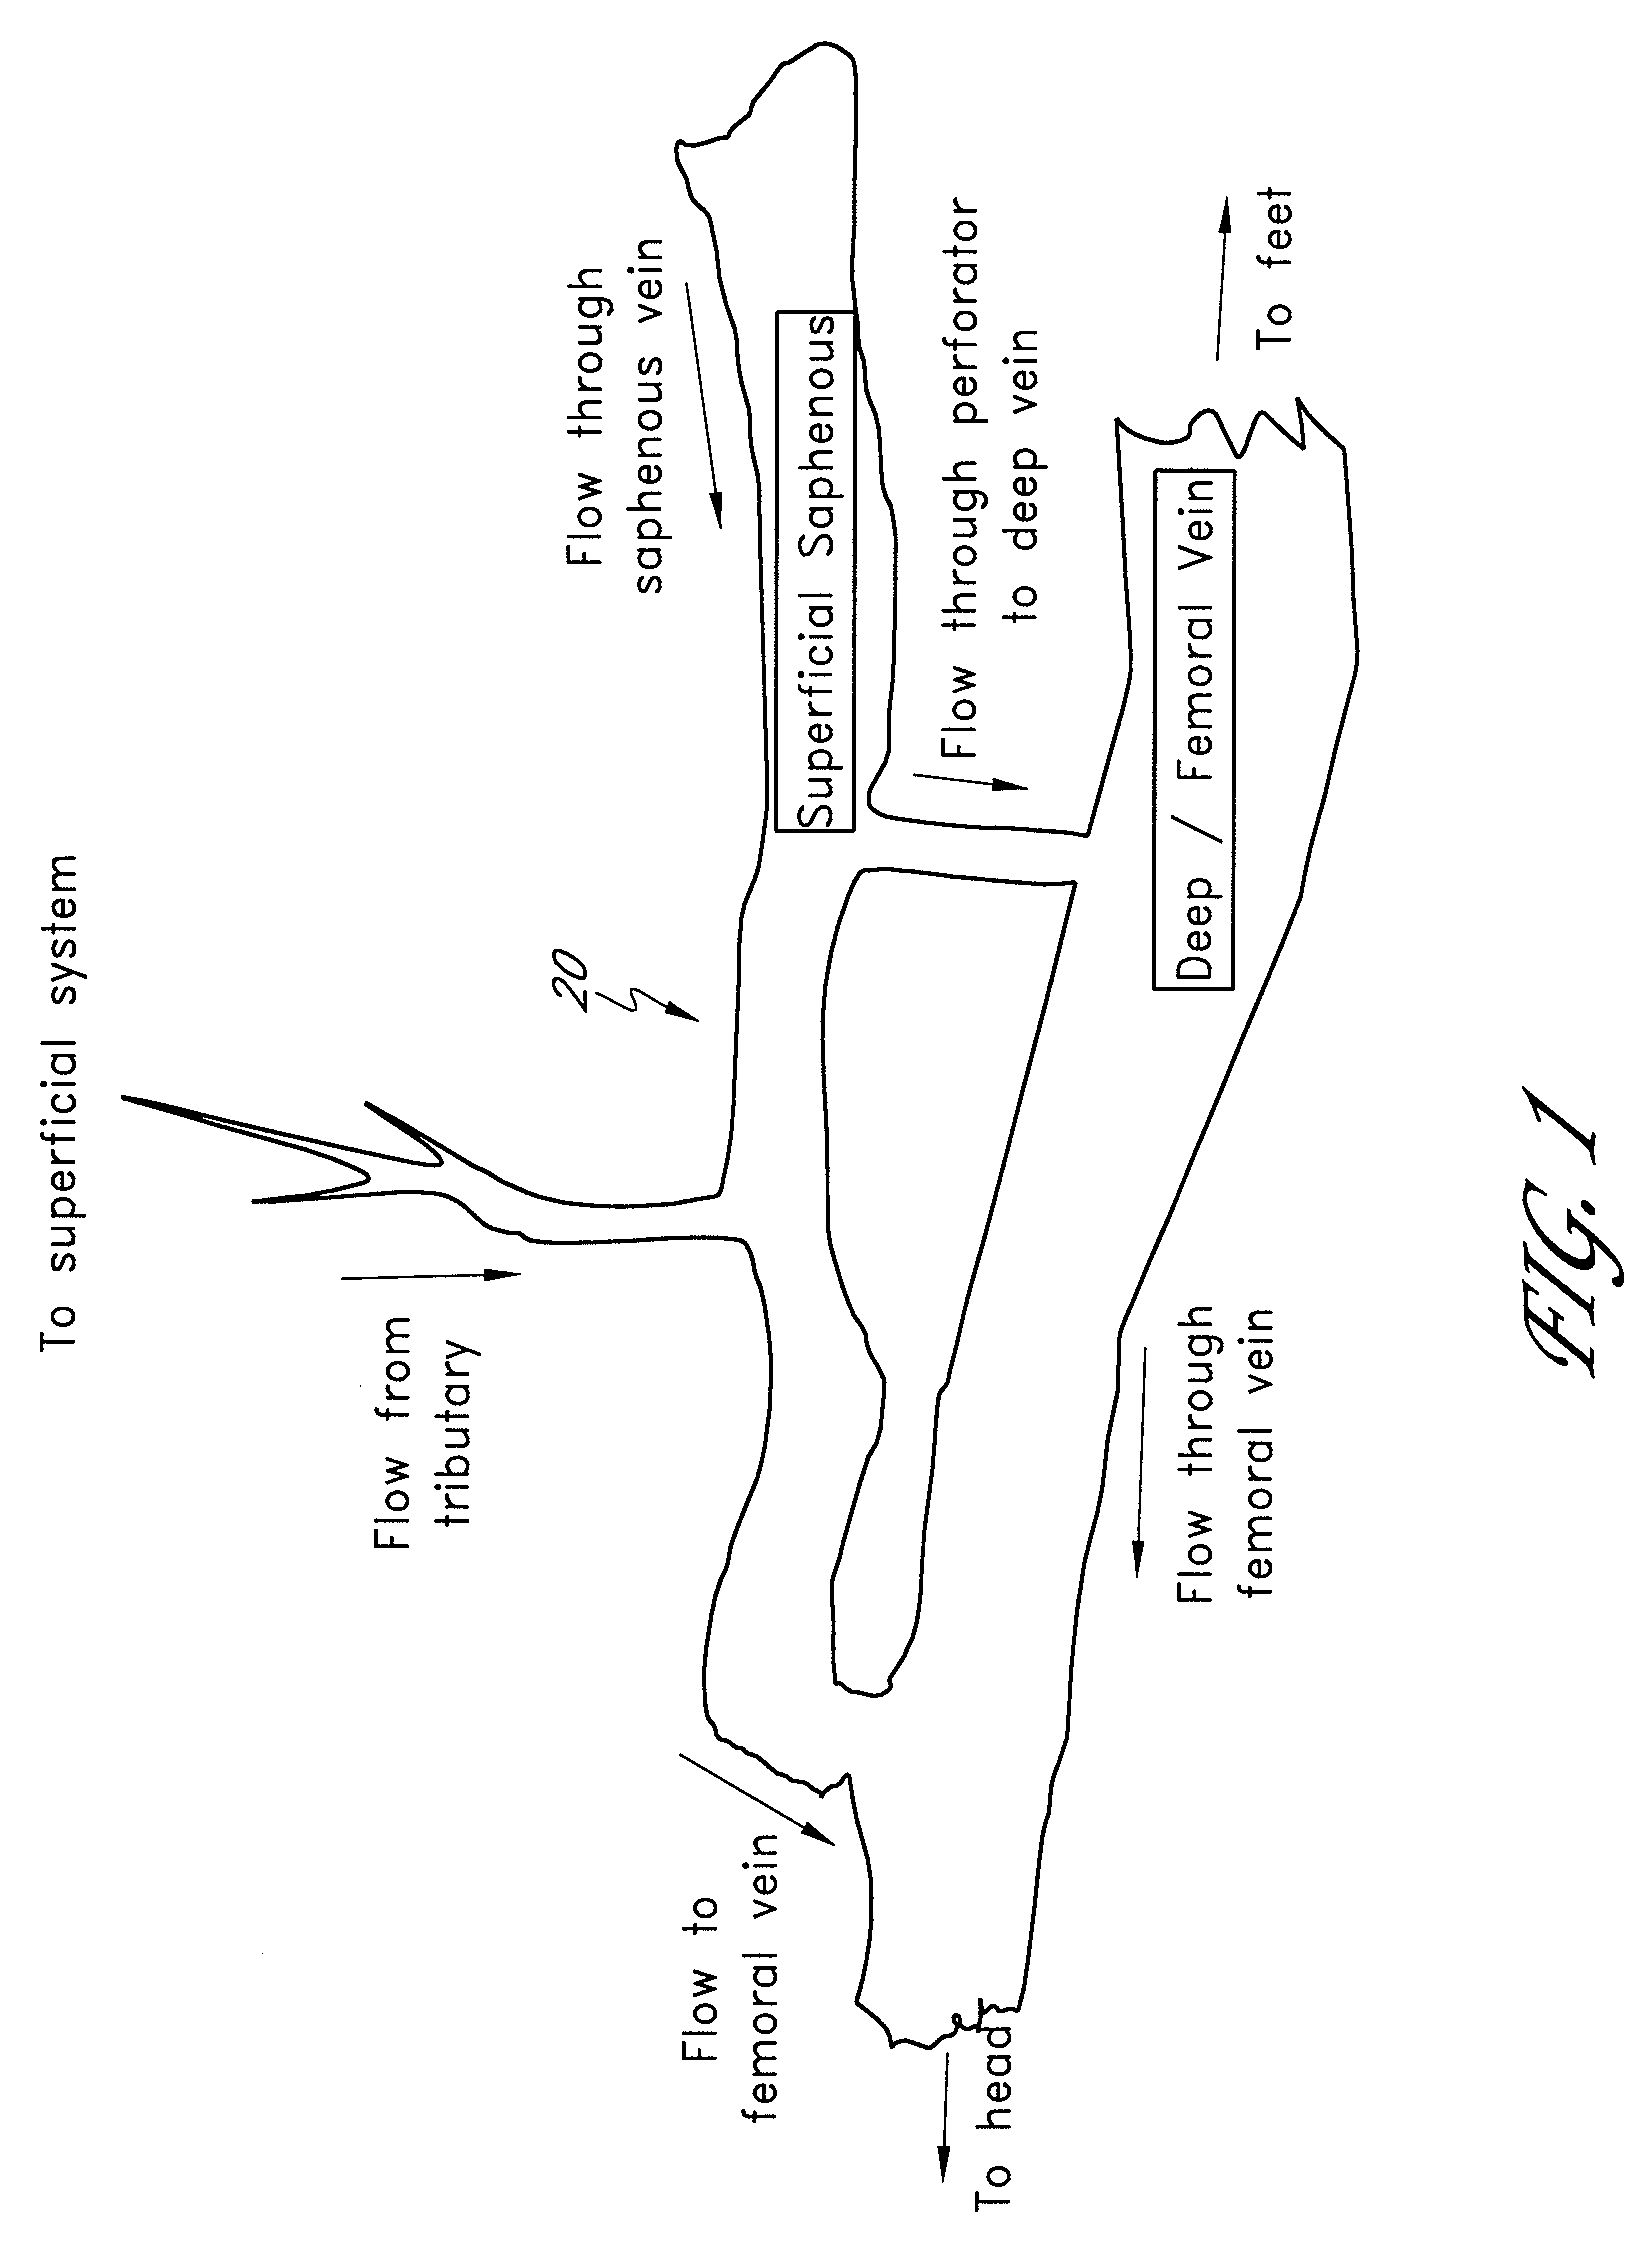 Method and apparatus for impeding migration of an implanted occlusive structure